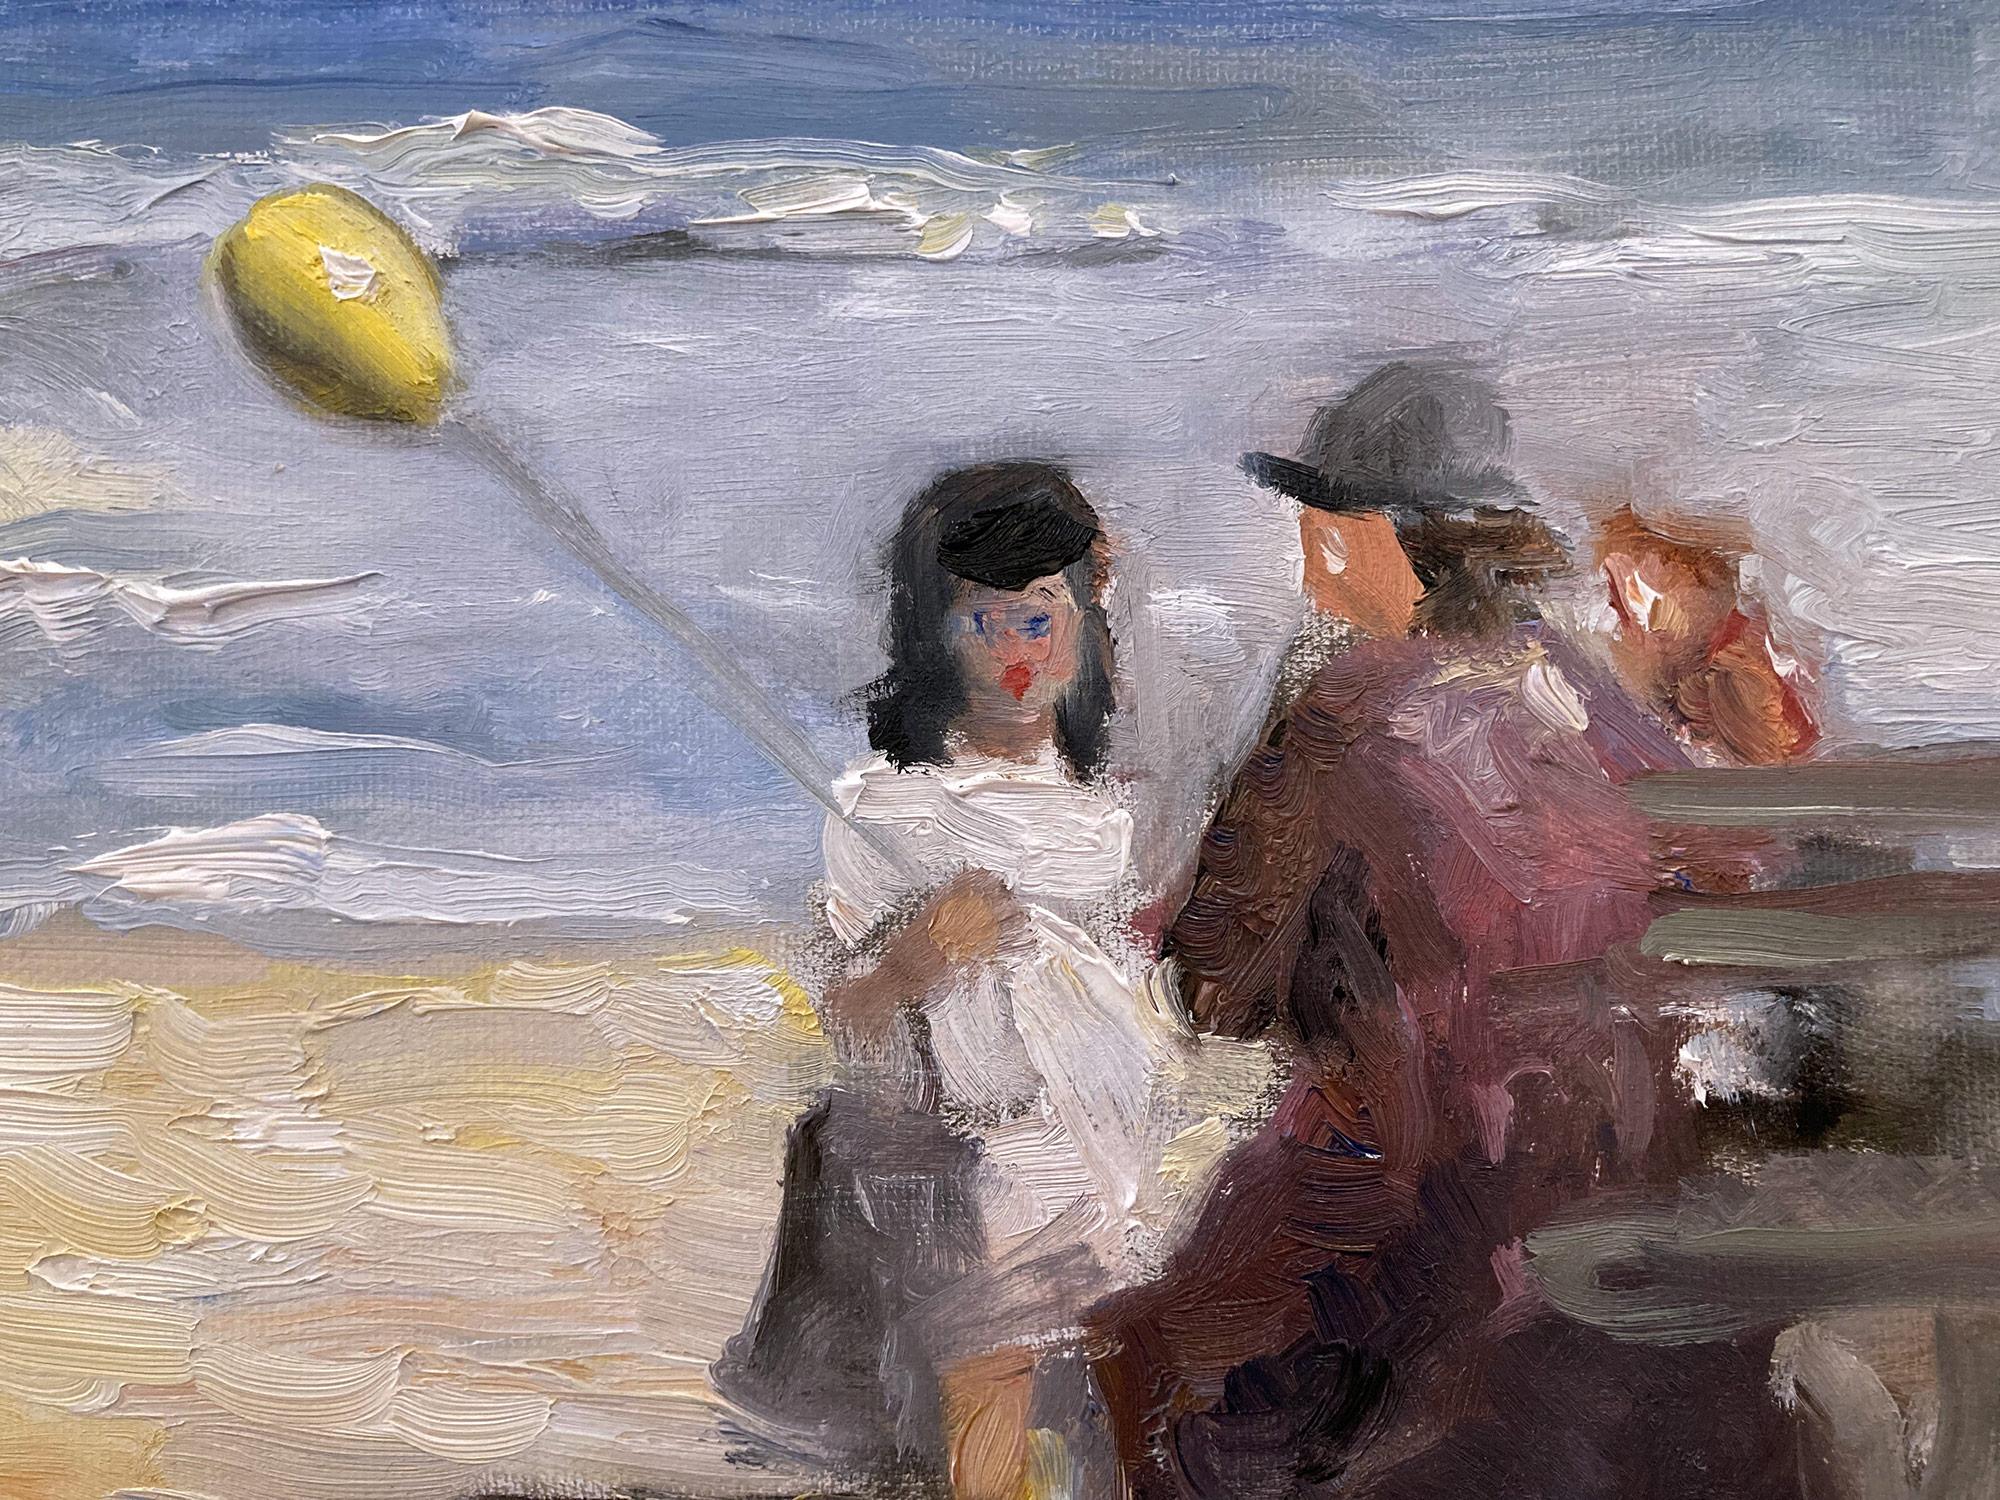 This painting depicts an impressionistic scene at the beach with beautiful brushwork and whimsical colors. The work is a following of Edward Potthast, capturing the beach and times of the early 20th Century similarly to his work. This piece is